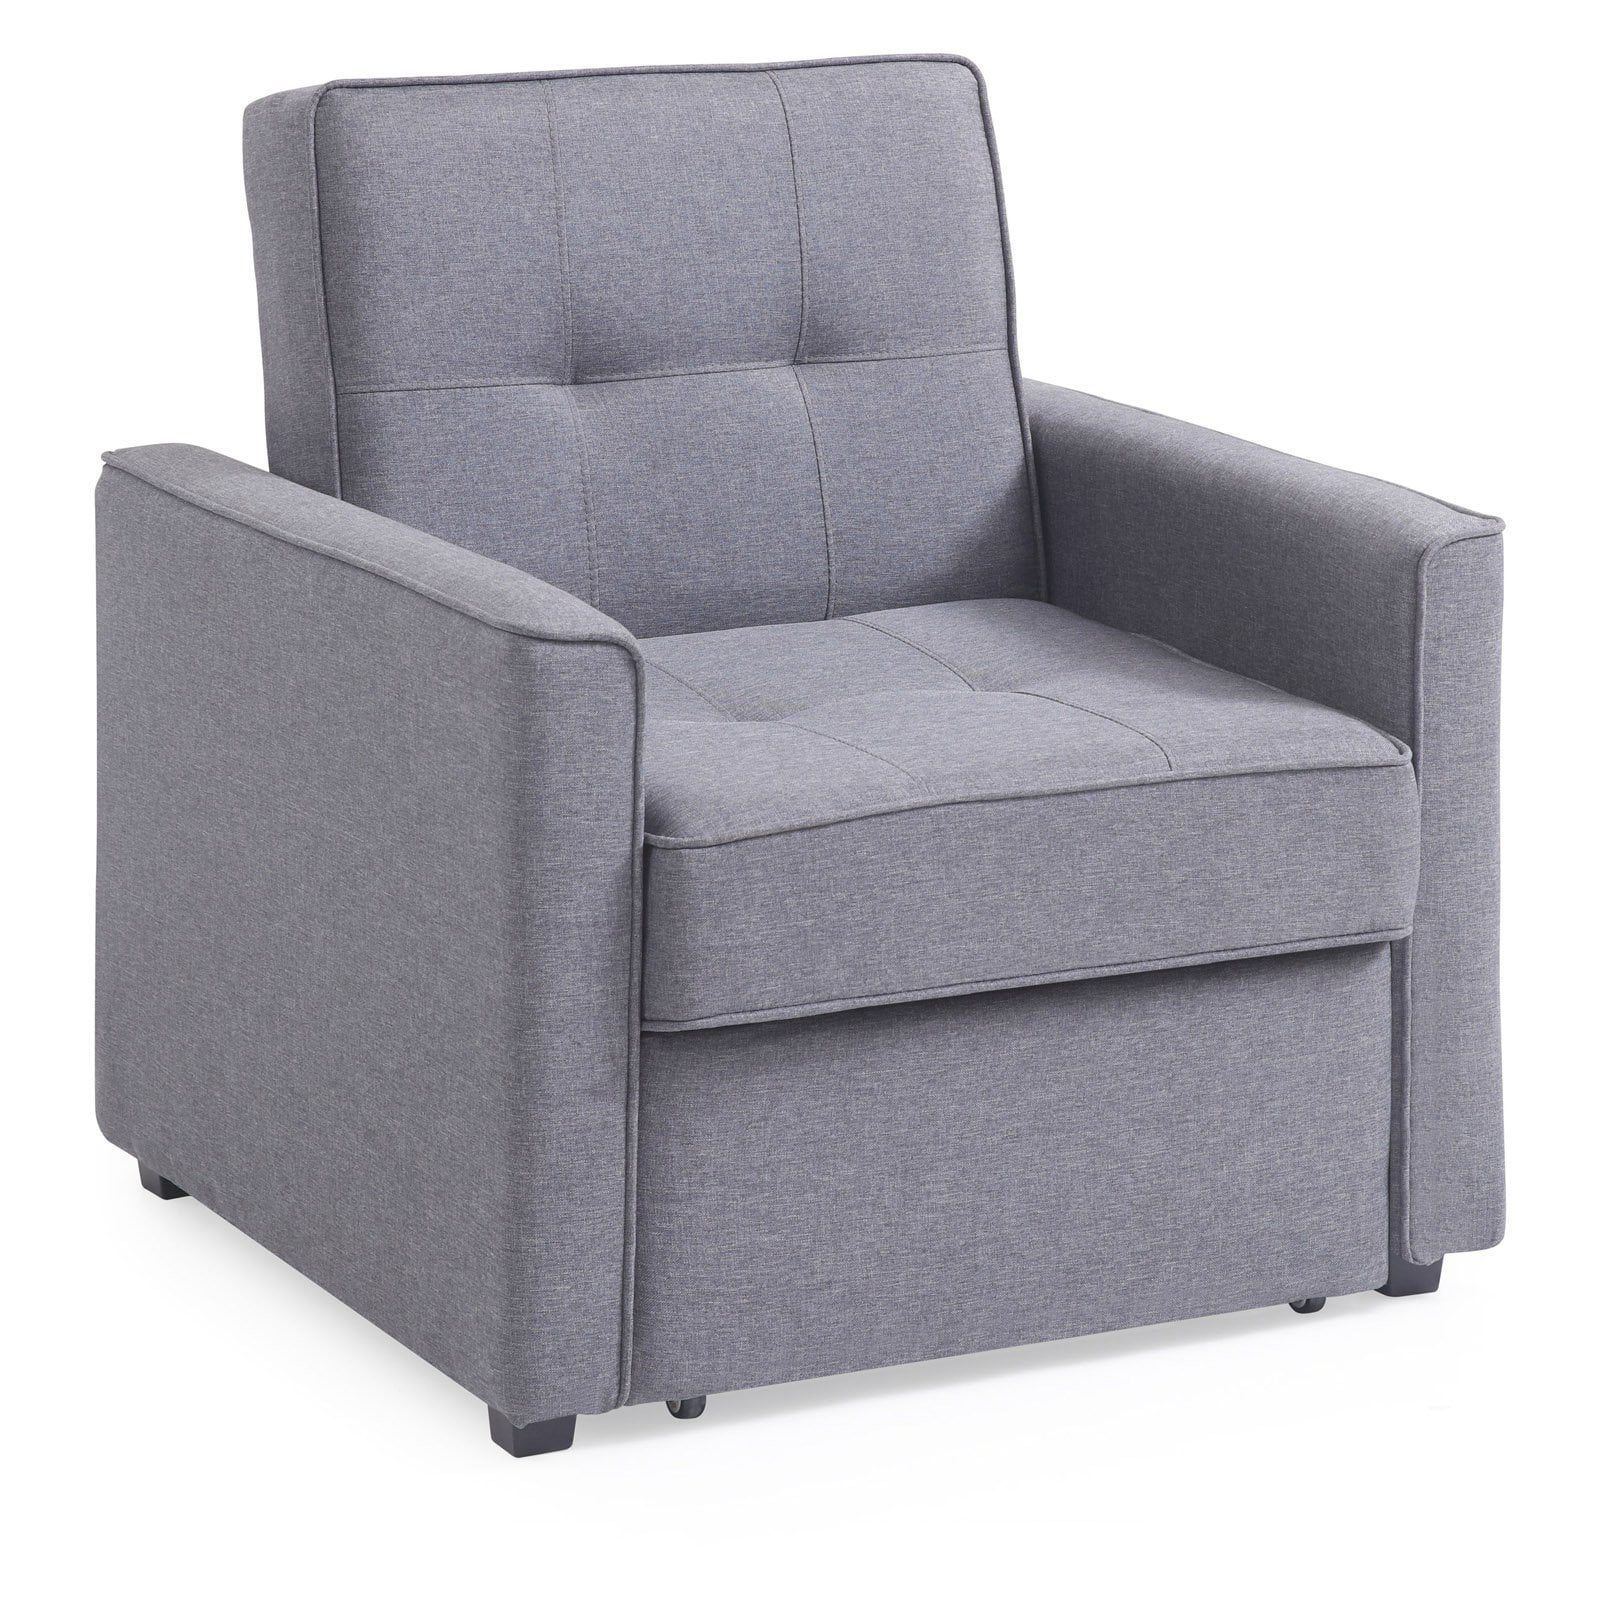 Gold Sparrow Chandler Gray Convertible Arm Chair Bed – Walmart With Regard To Convertible Light Gray Chair Beds (View 5 of 20)